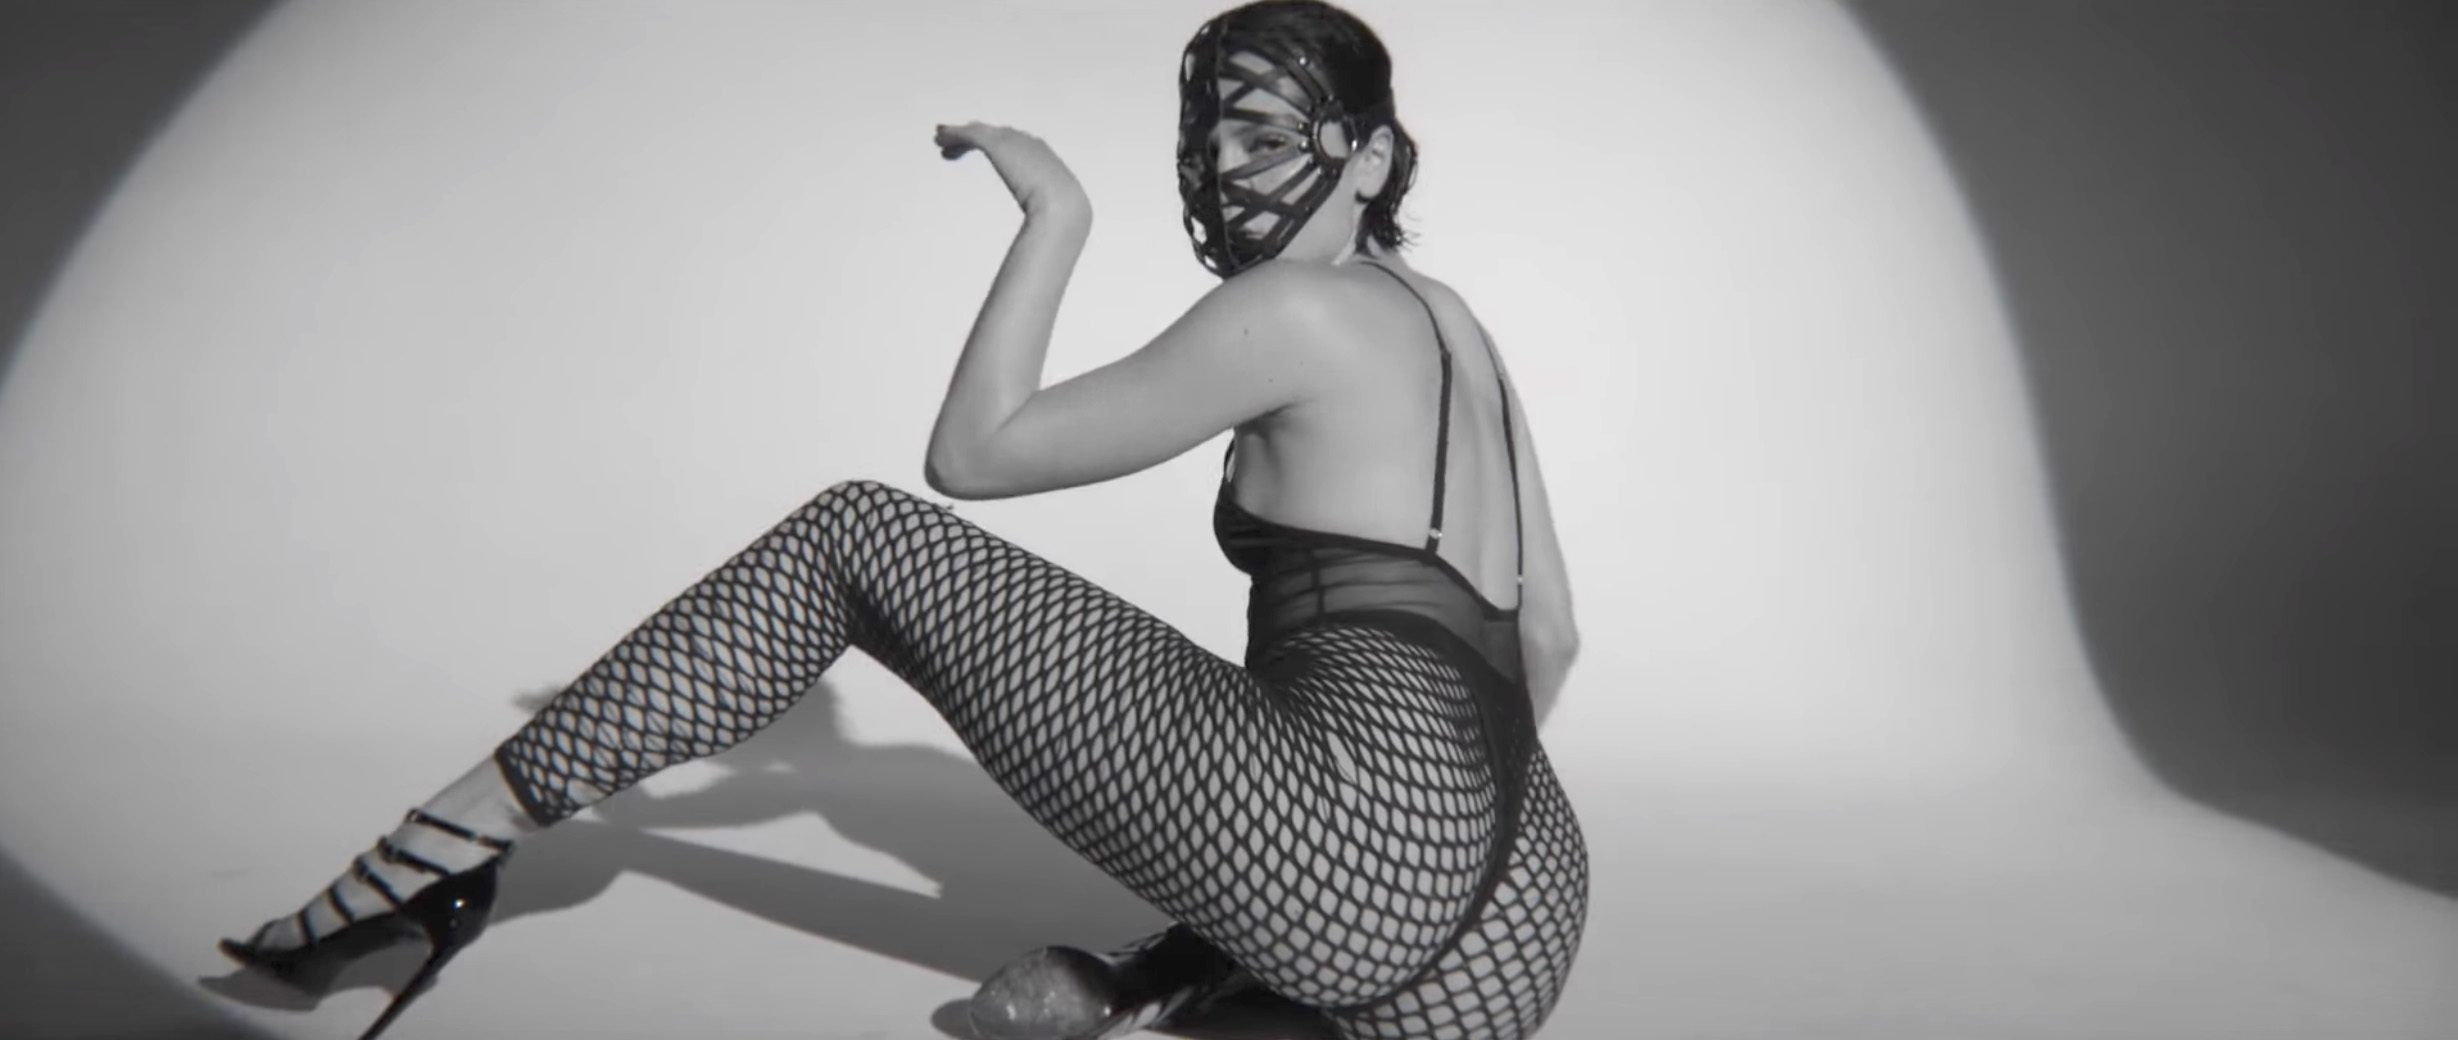 Jessie J - think about that sexy photos